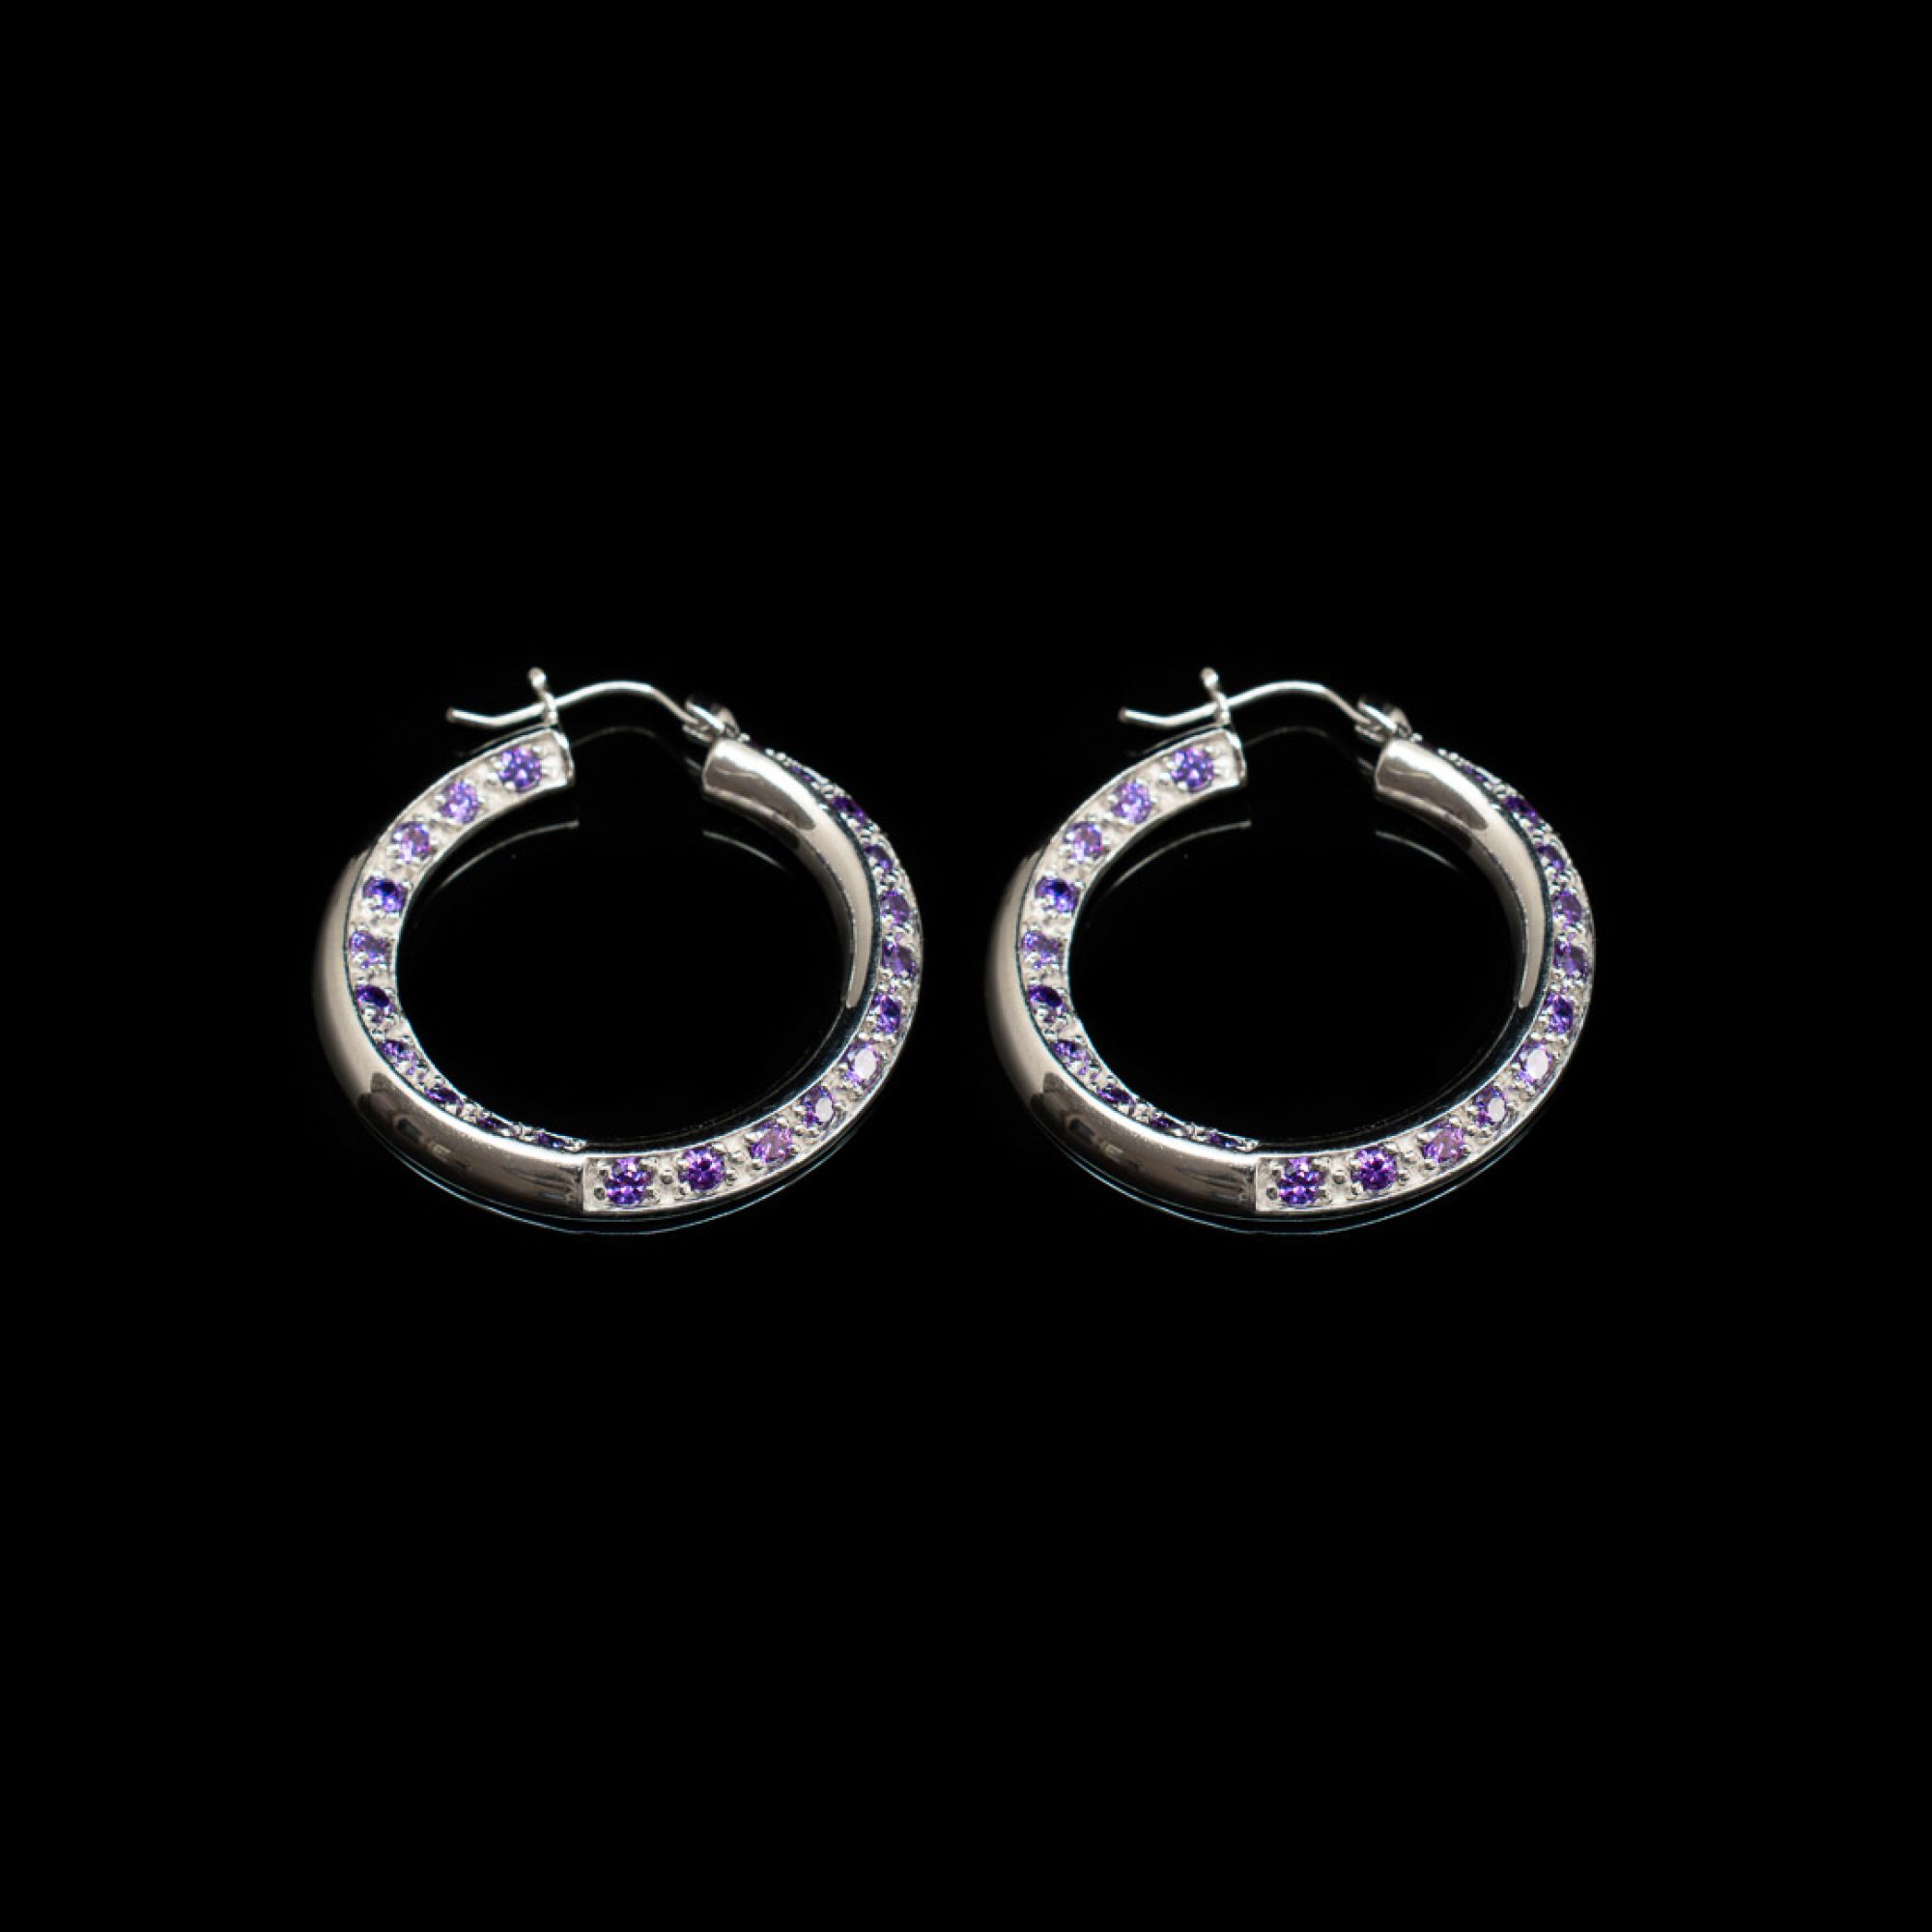 Silver hoops with amethyst stones